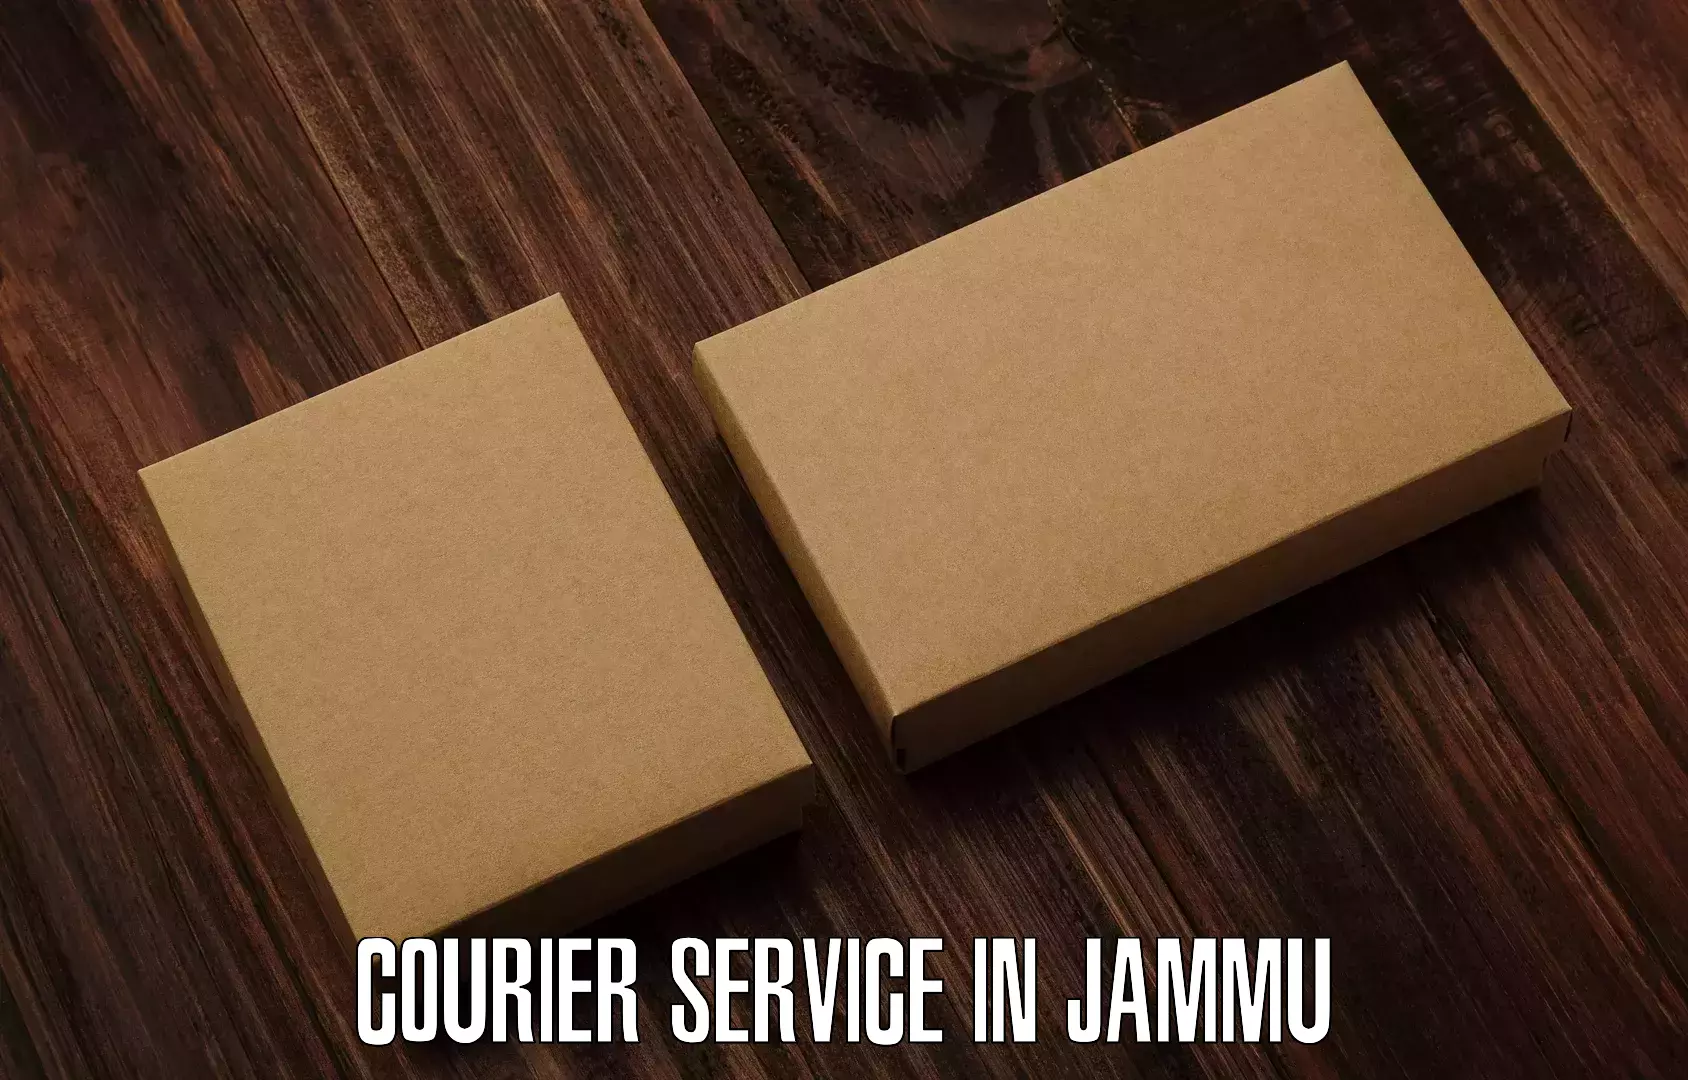 Online package tracking in Jammu